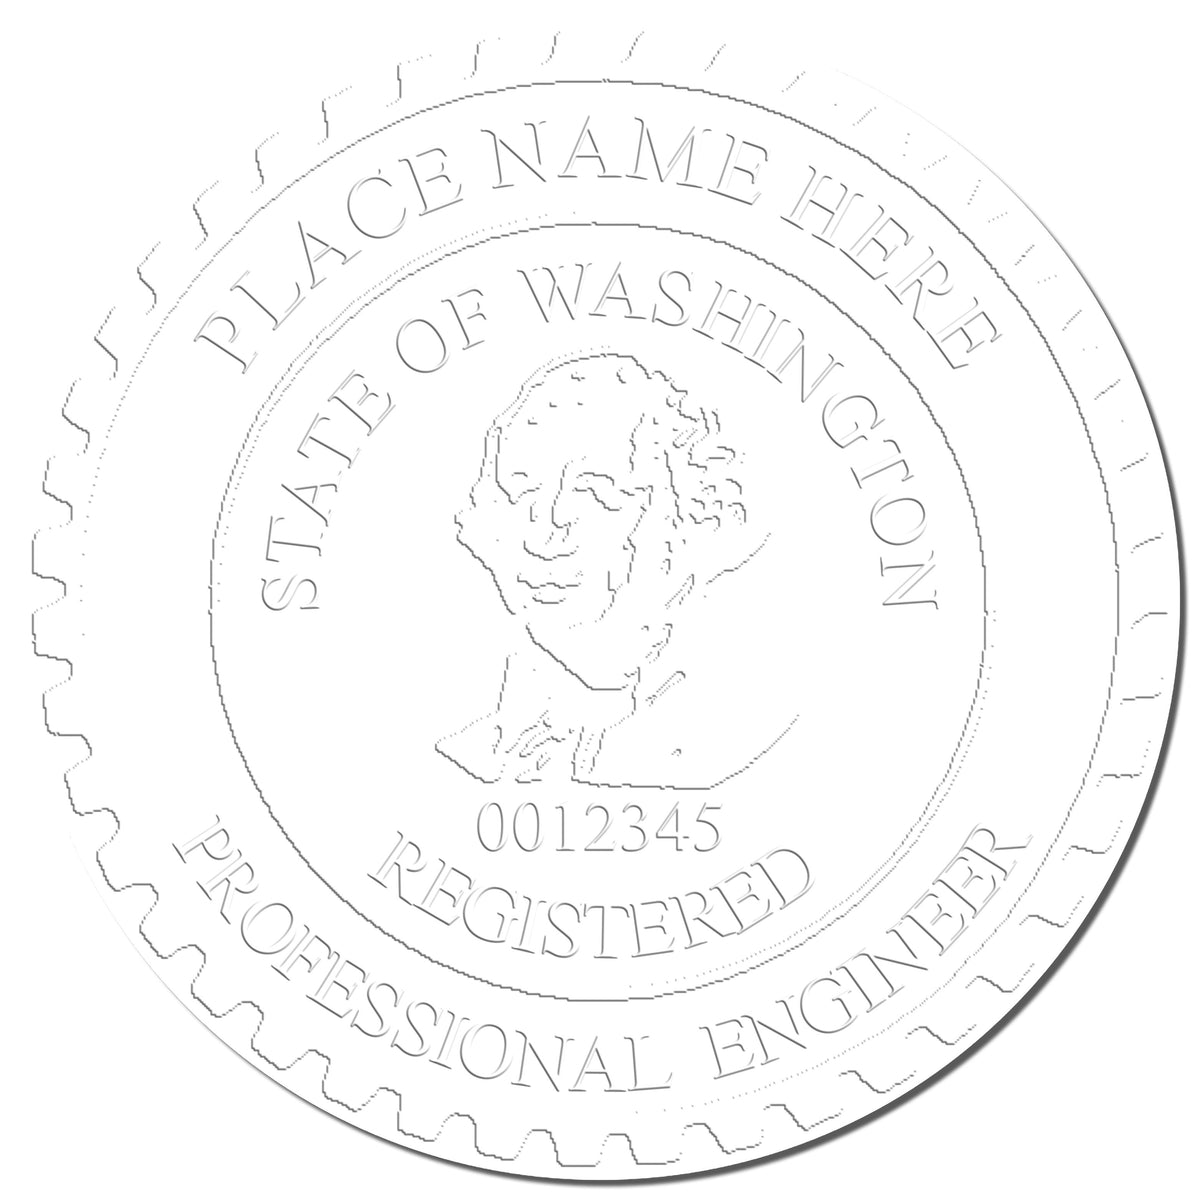 This paper is stamped with a sample imprint of the Heavy Duty Cast Iron Washington Engineer Seal Embosser, signifying its quality and reliability.